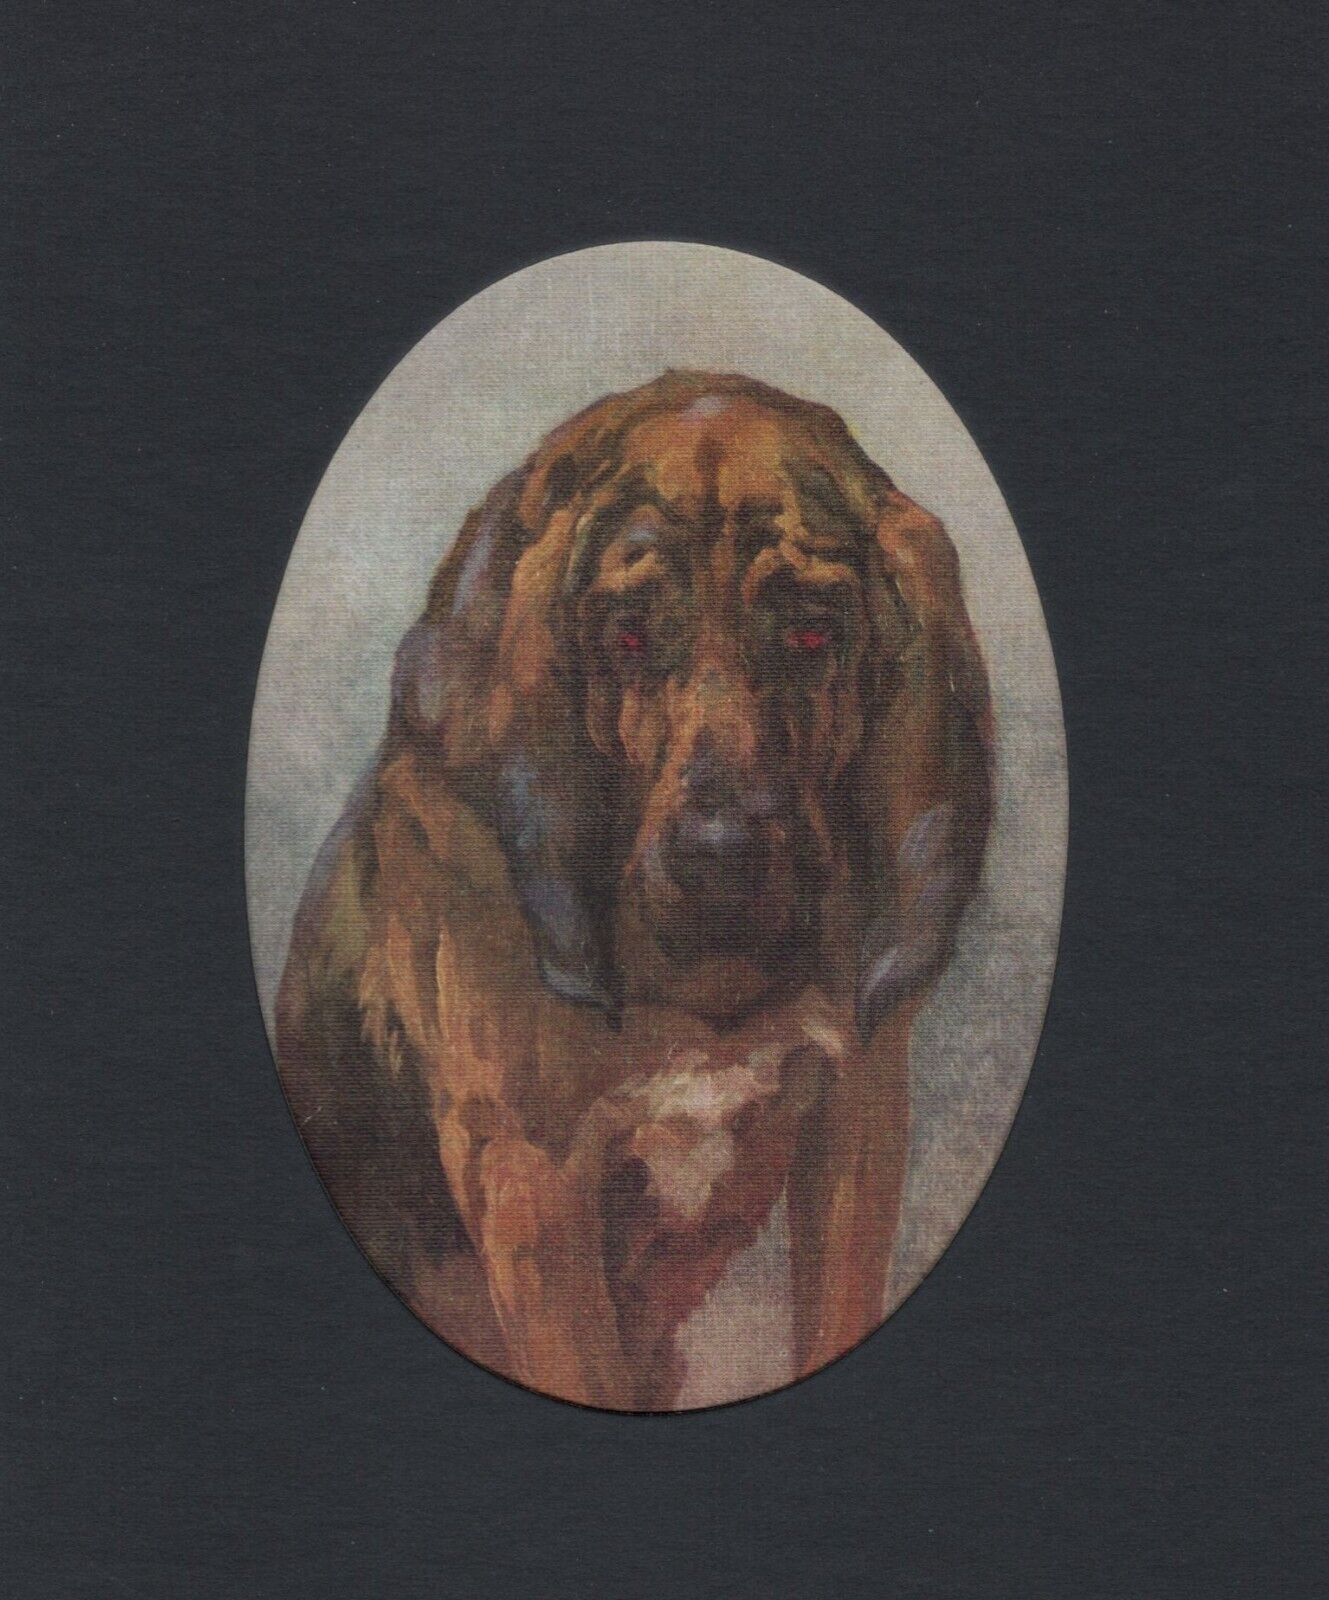 Vintage 1934 Bloodhound Print - CUSTOM MATTED - Dog Art Print - Ready to Gift